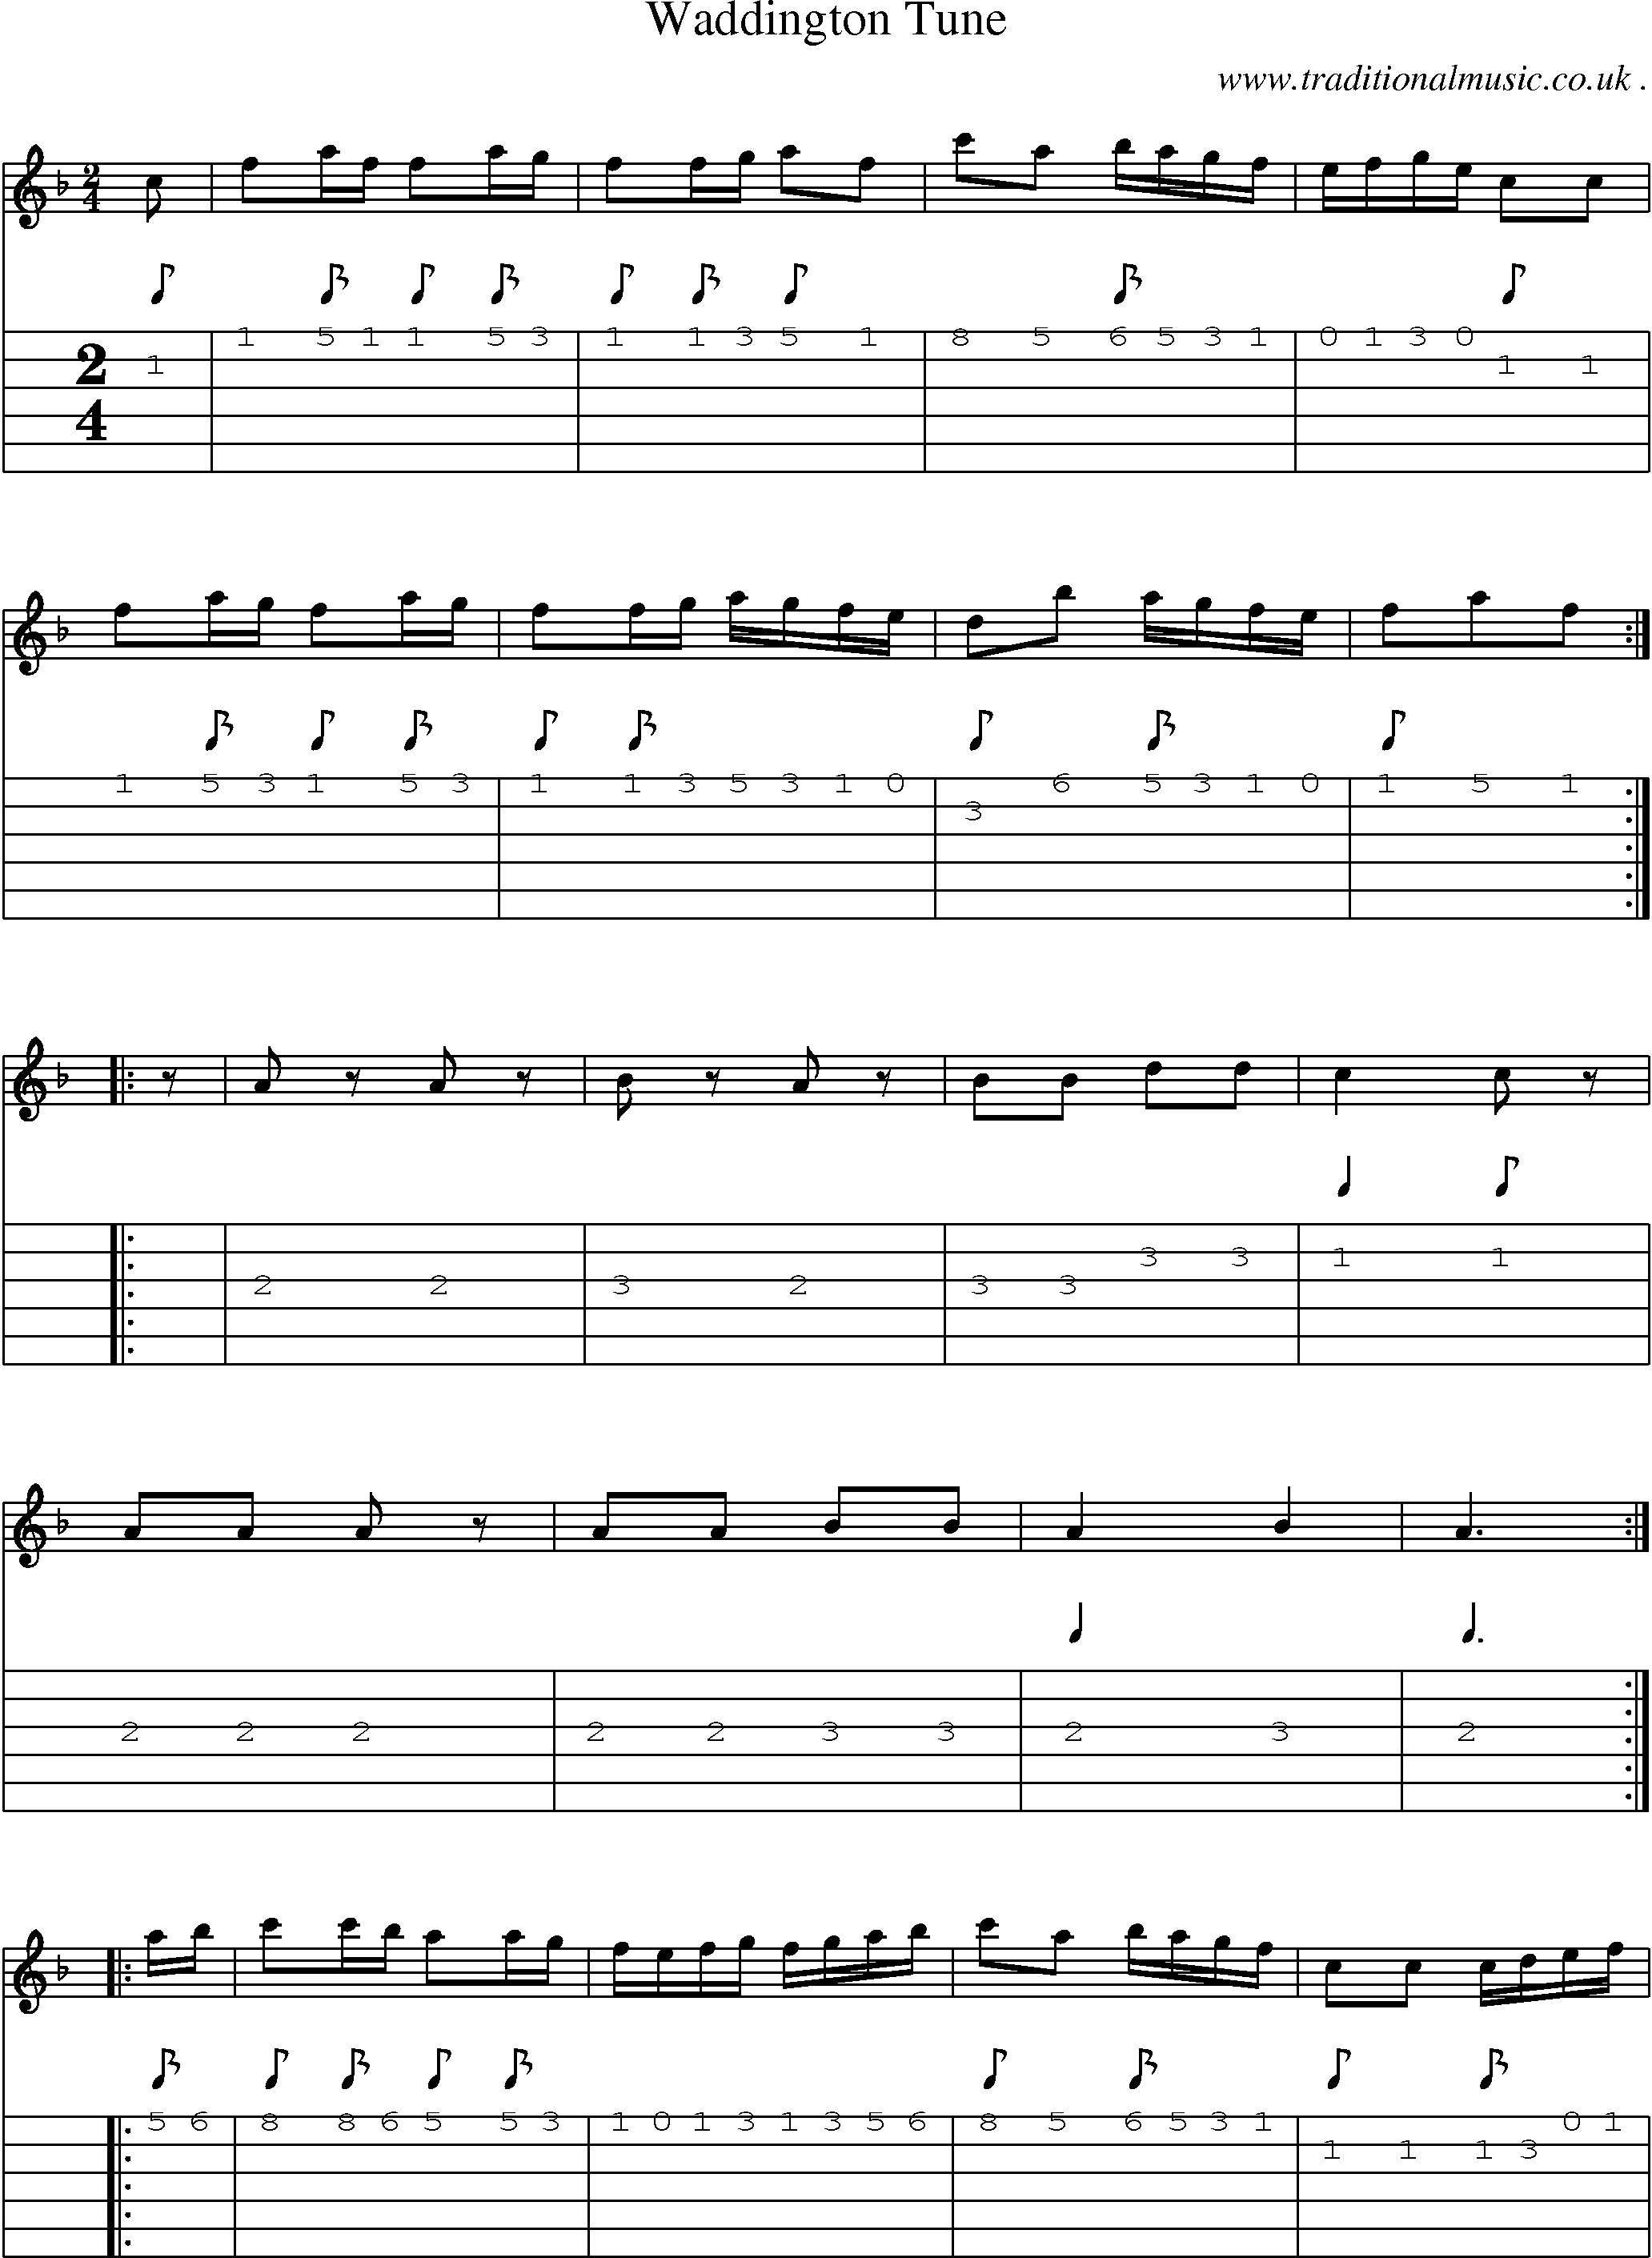 Sheet-Music and Guitar Tabs for Waddington Tune